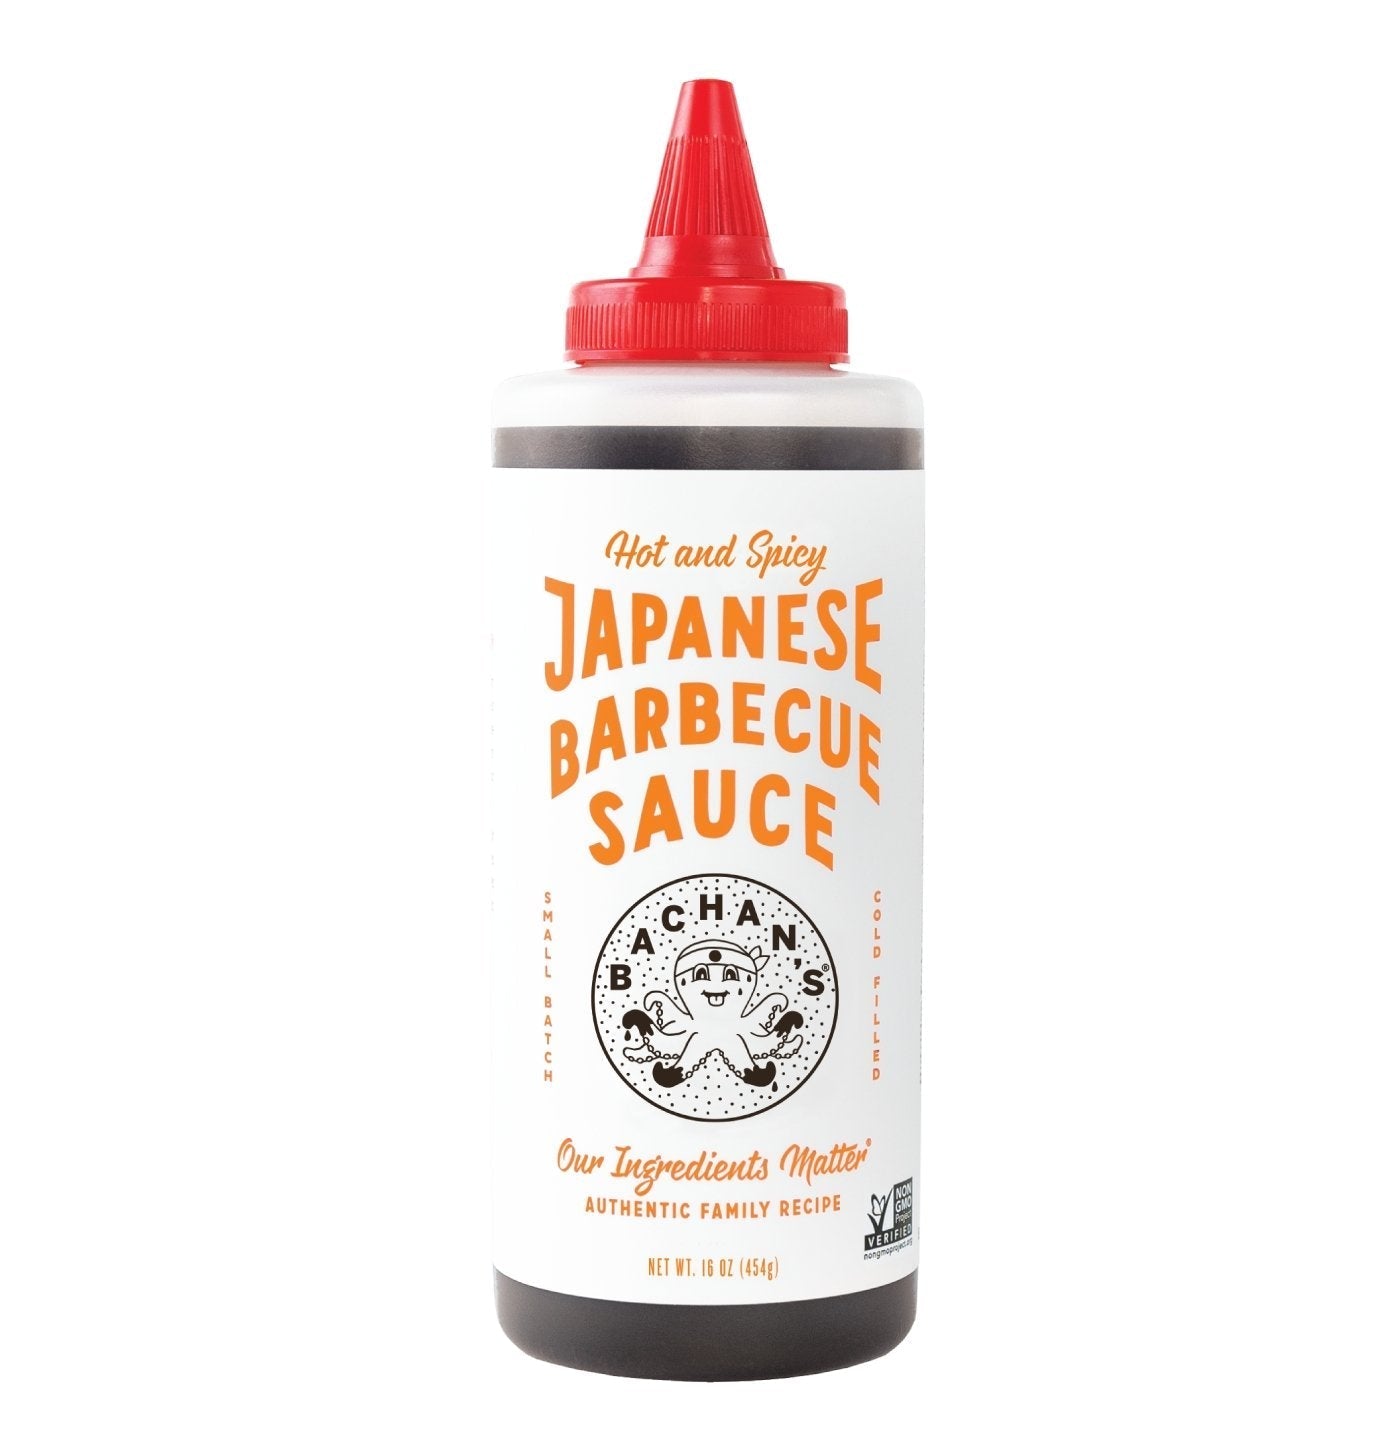 Bachan's Hot and Spicy Japanese Barbecue Sauce Case - Pacific Flyway Supplies